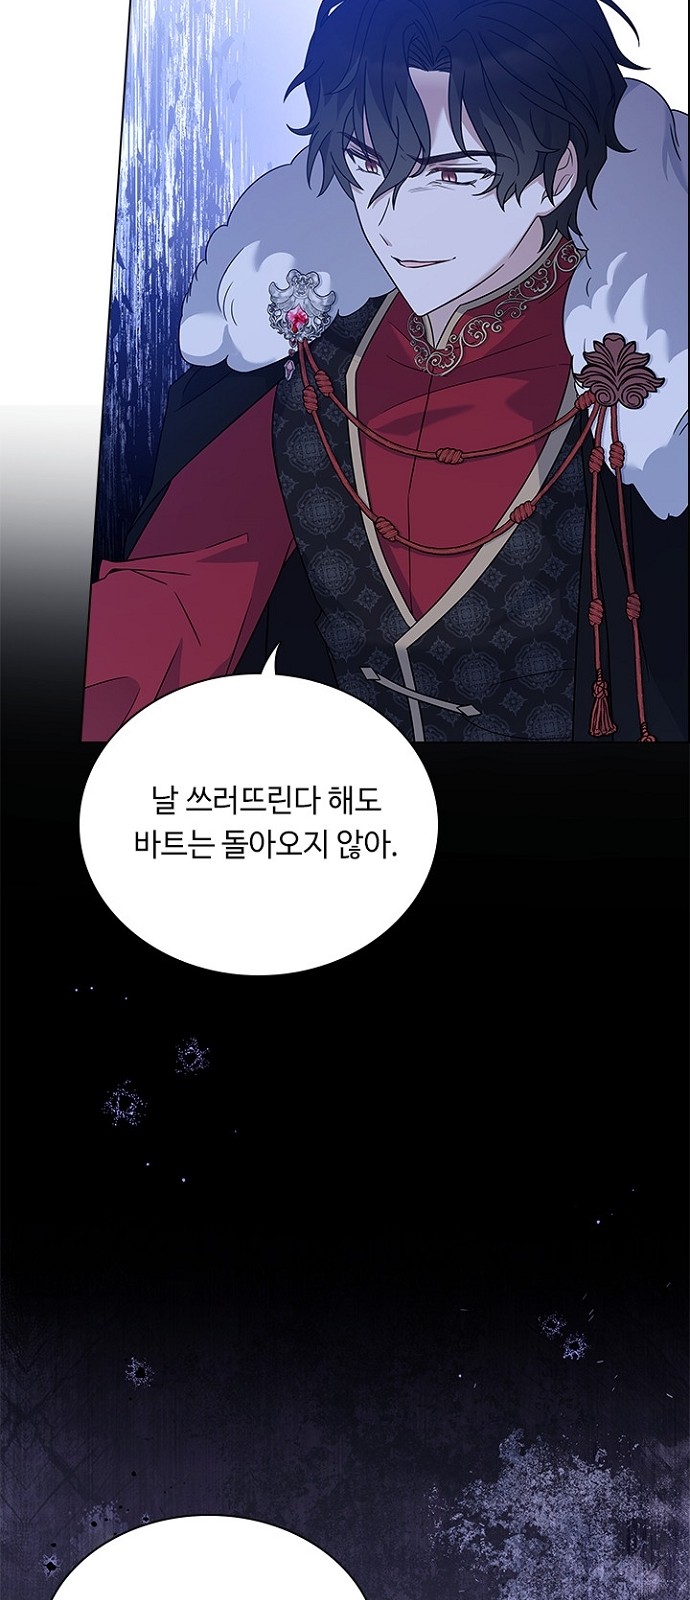 His Majesty's Proposal (A Night With the Emperor) - Chapter 93 - Page 9